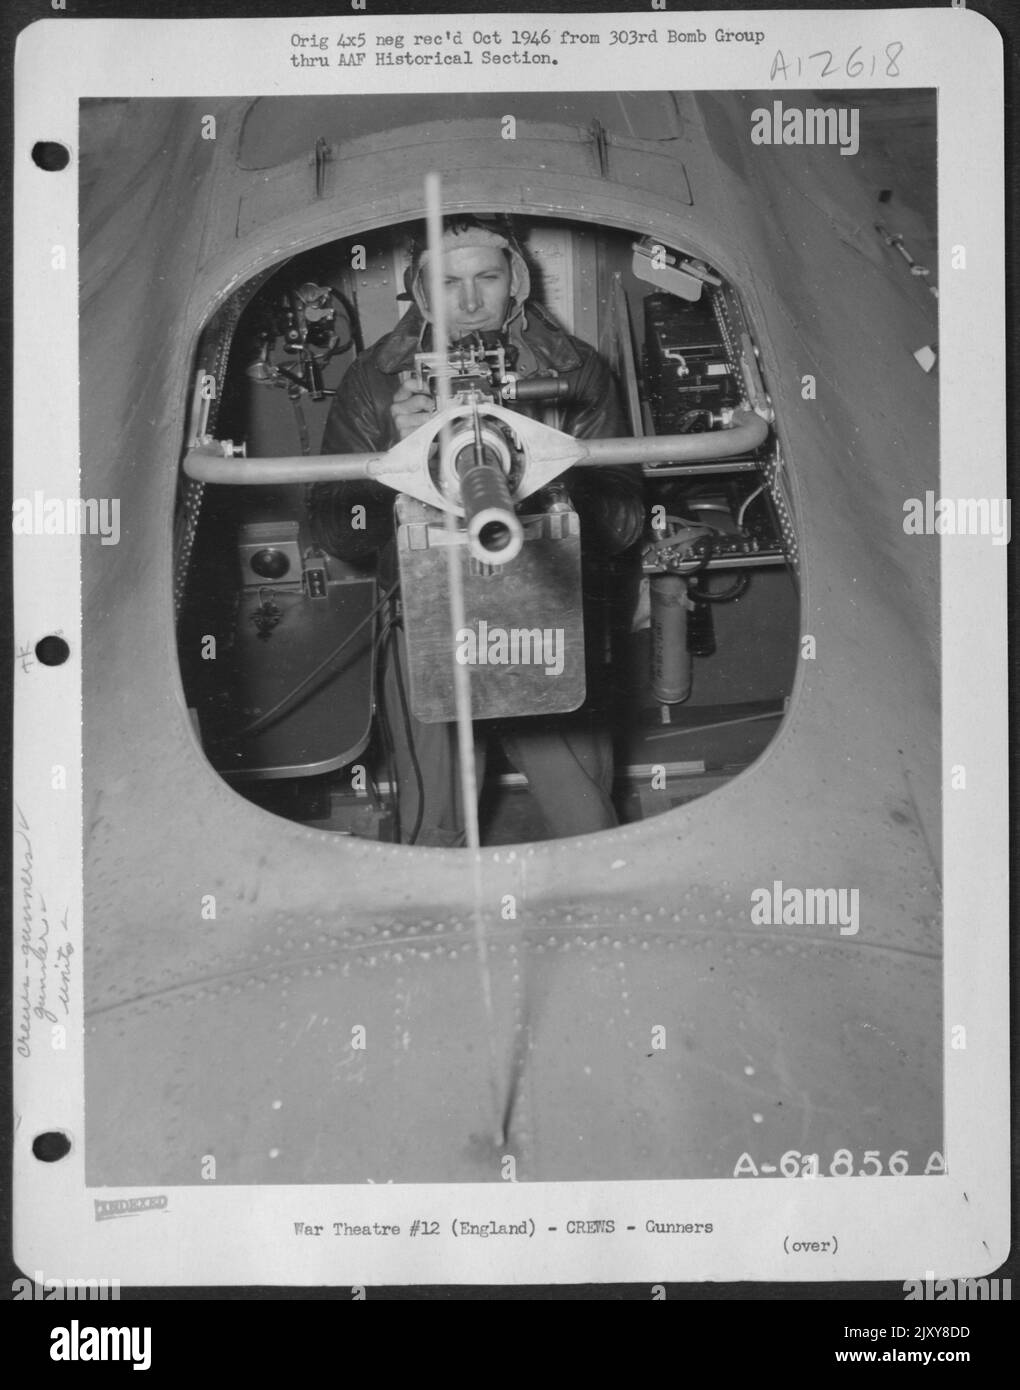 Radio Room Gunner Of The Boeing B-17 'Flying Fortress' Hell'S Angels In His Position On The Plane. 303Rd Bomb Group, England. 6 June 1943. Stock Photo